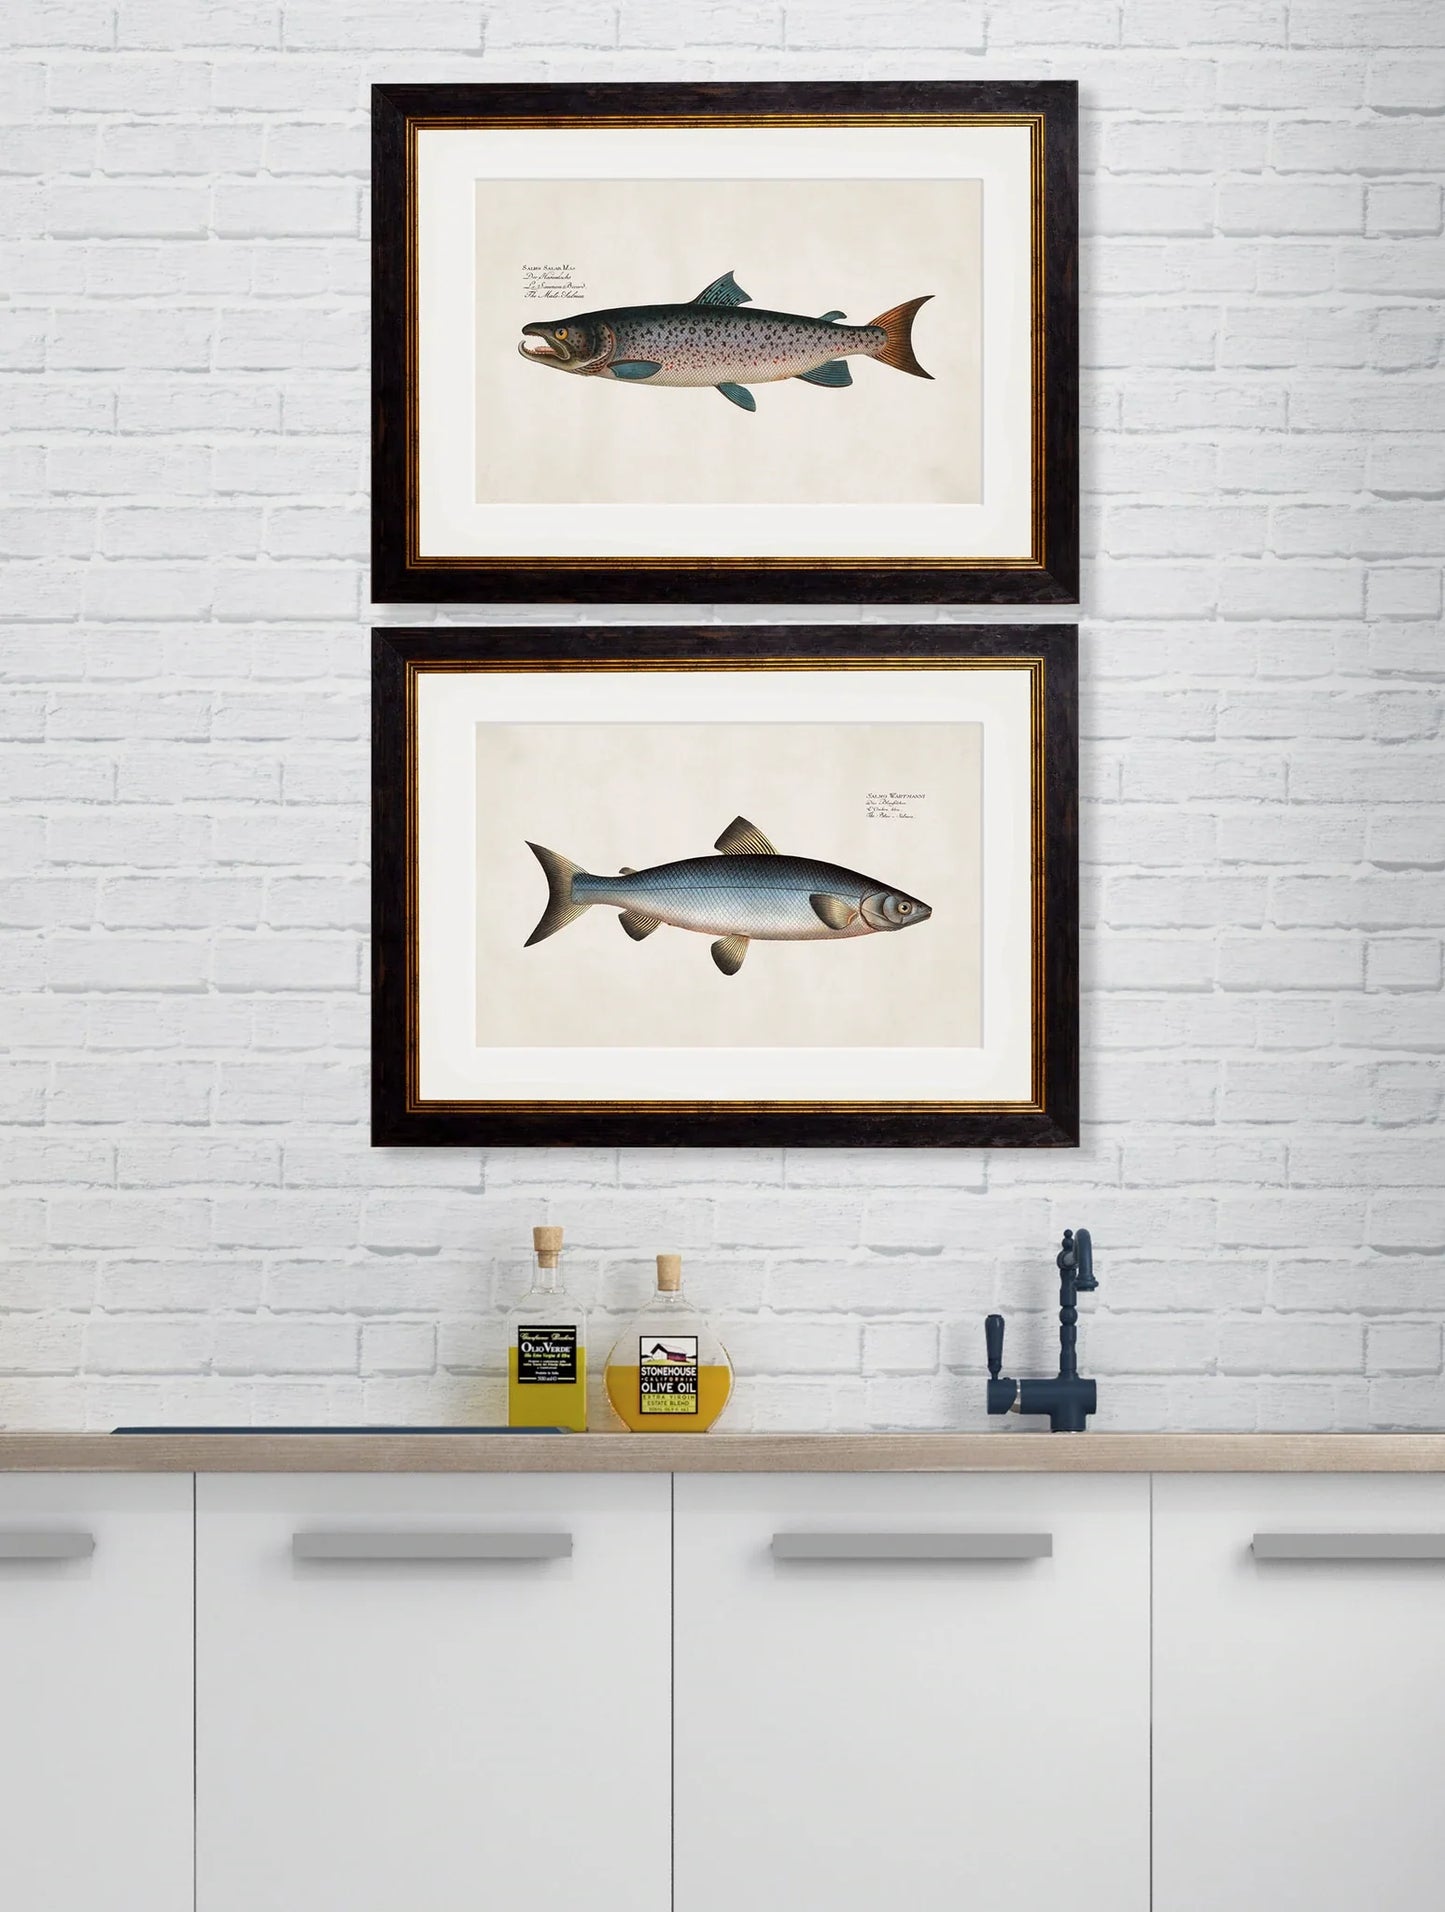 C.1785 Studies of Salmon Frames for sale - Woodcock and Cavendish